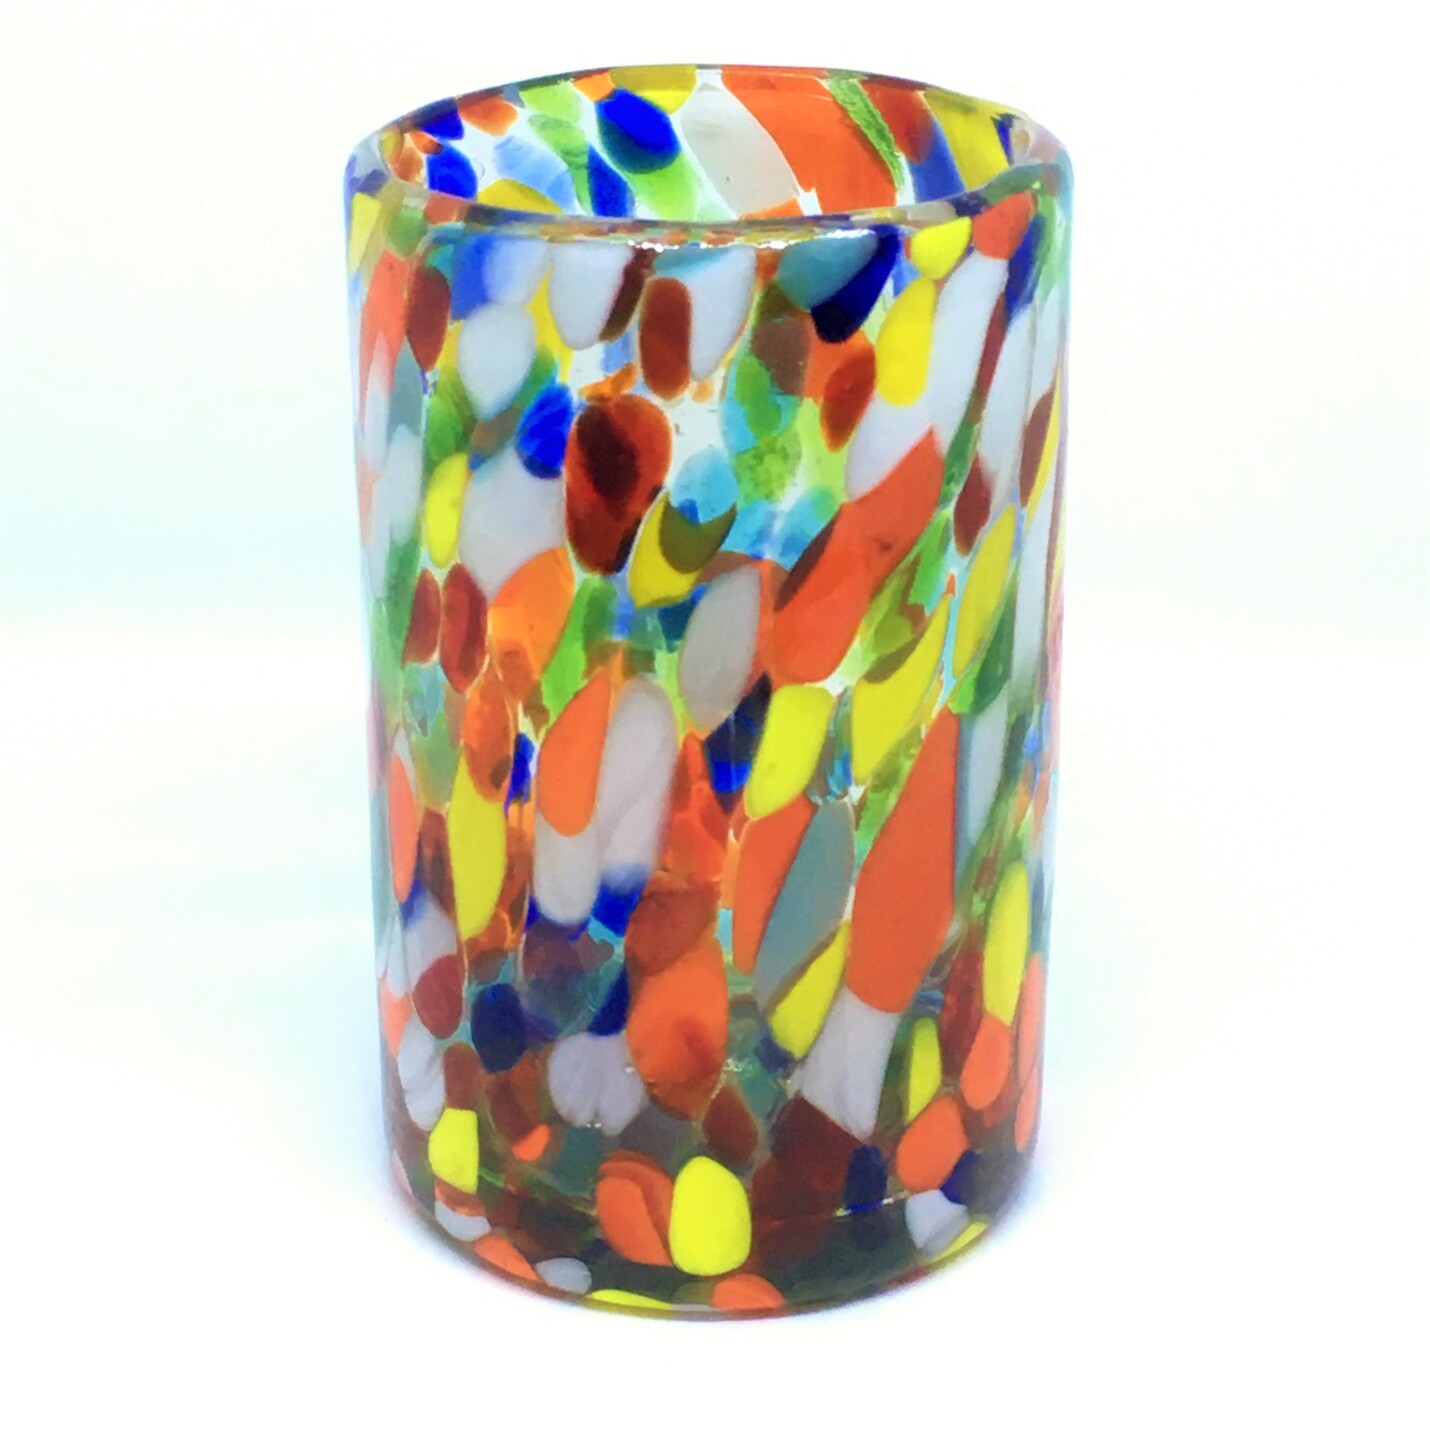 Wholesale Confetti Glassware / Confetti Carnival 14 oz Drinking Glasses  / Let the spring come into your home with this colorful set of glasses. The multicolor glass decoration makes them a standout in any place.